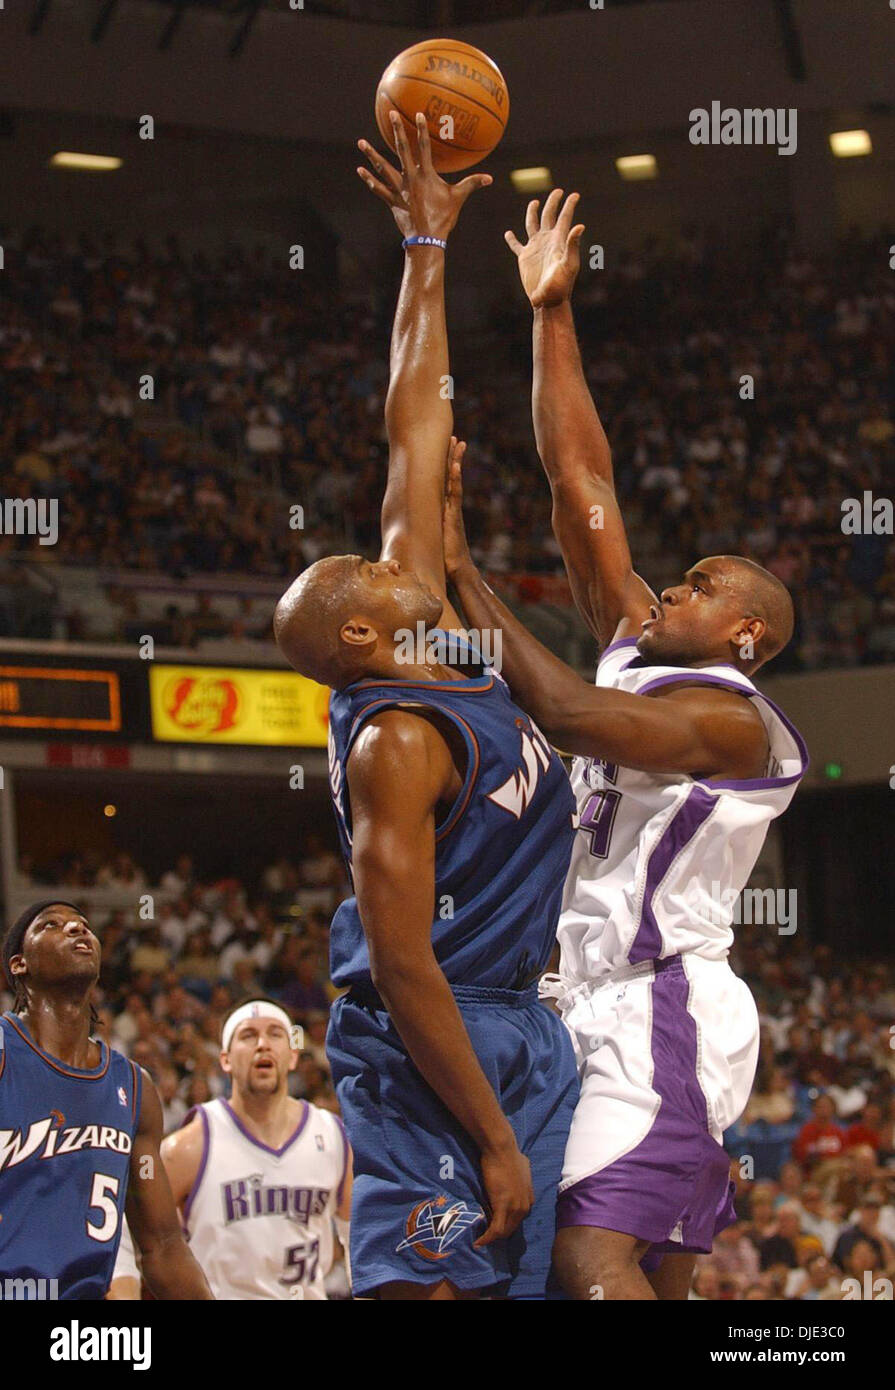 Mar 28, 2004; Sacramento, CA, USA; The Sacramento Kings CHRIS WEBBER (R) scores two of his 23, points against the Washington Wizards BRENDAN HAYWOOD at Arco Arena during the Kings 100 to 92 victory. Stock Photo